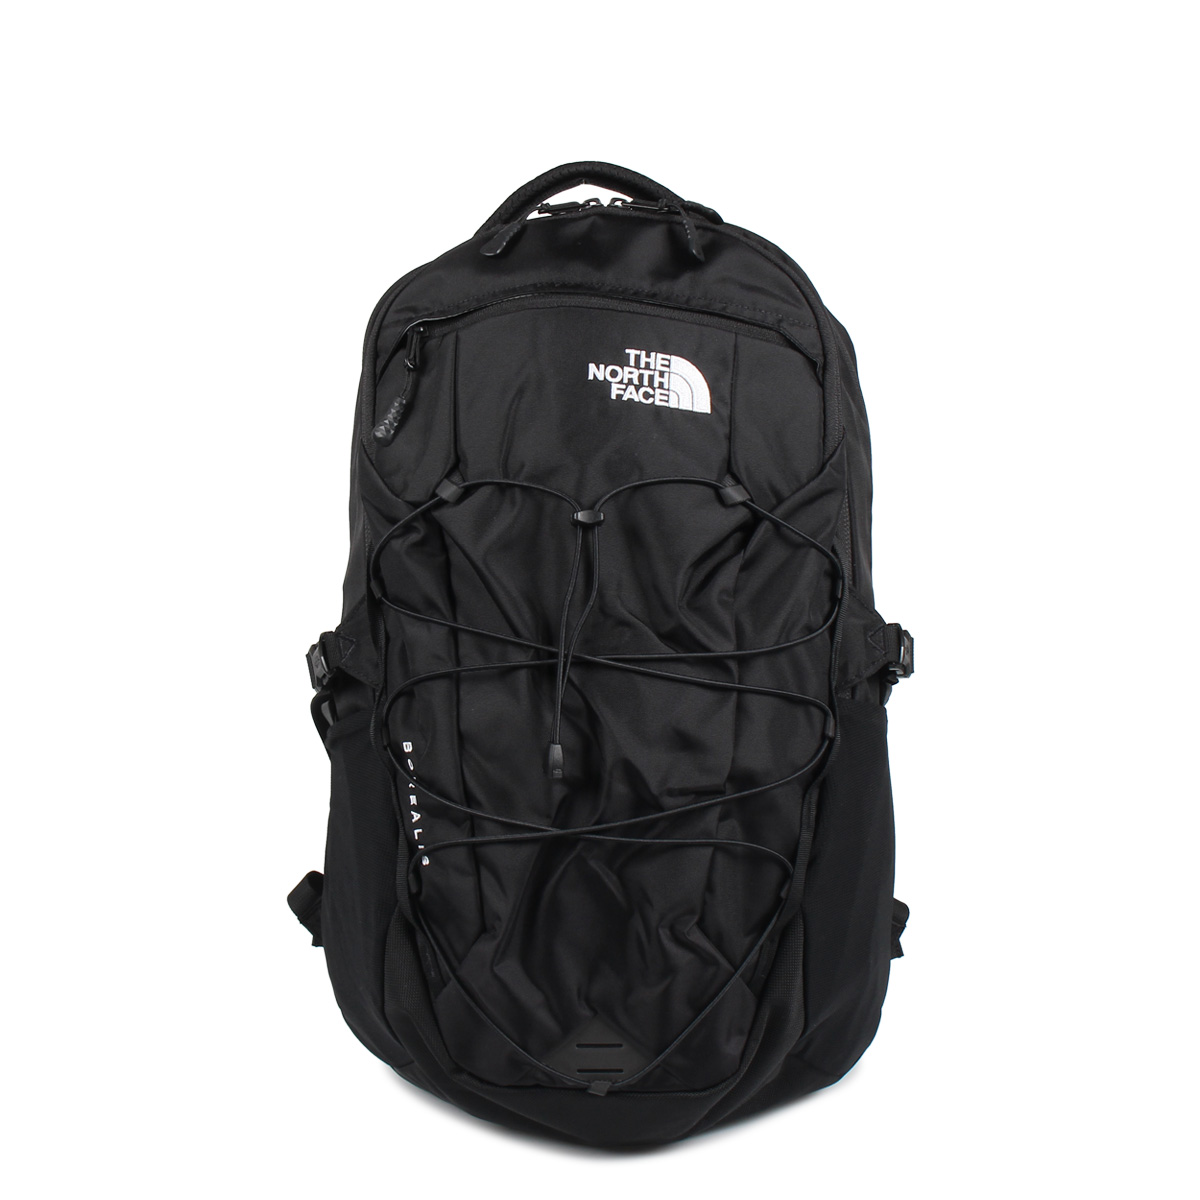 THE NORTH FACE BOREALIS BACKPACK 